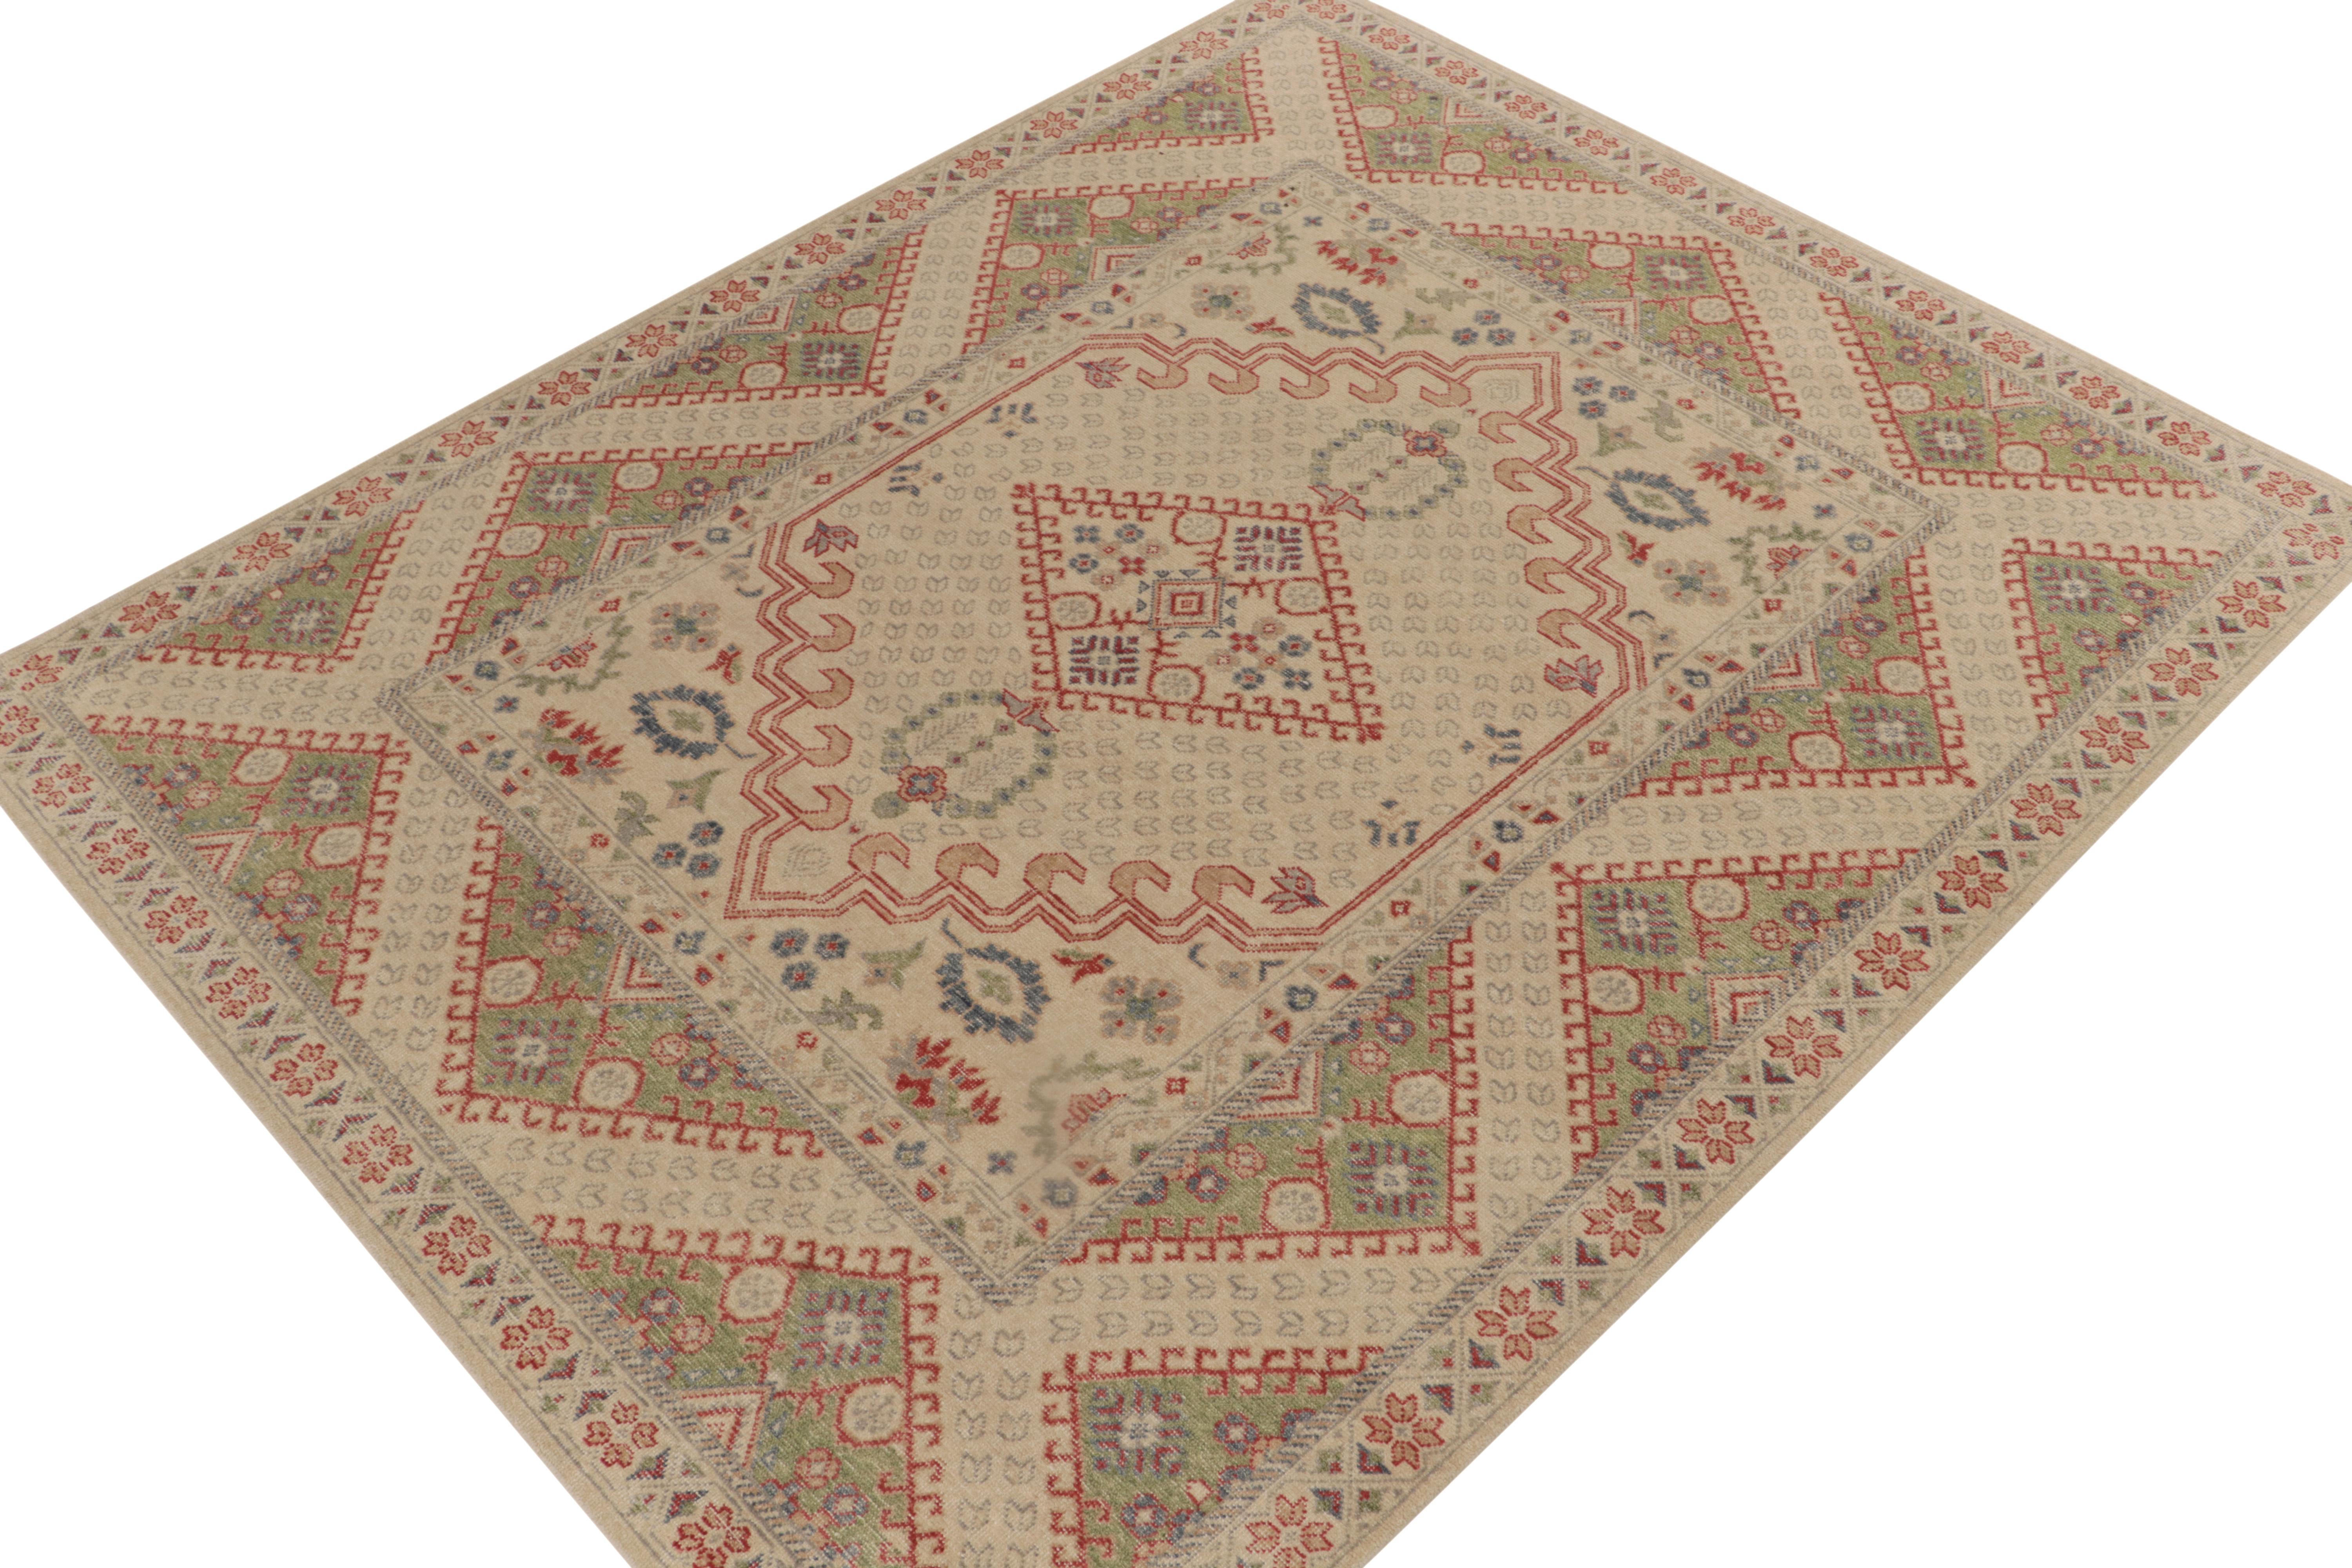 From Rug & Kilim’s Homage Collection, an 8x10 hand-knotted wool rug inspired by turn-of-the-century antique Ghiordes rugs. 

On the Design: The vision enjoys a sophisticated play of regal geometry in greige and green, with red accents especially